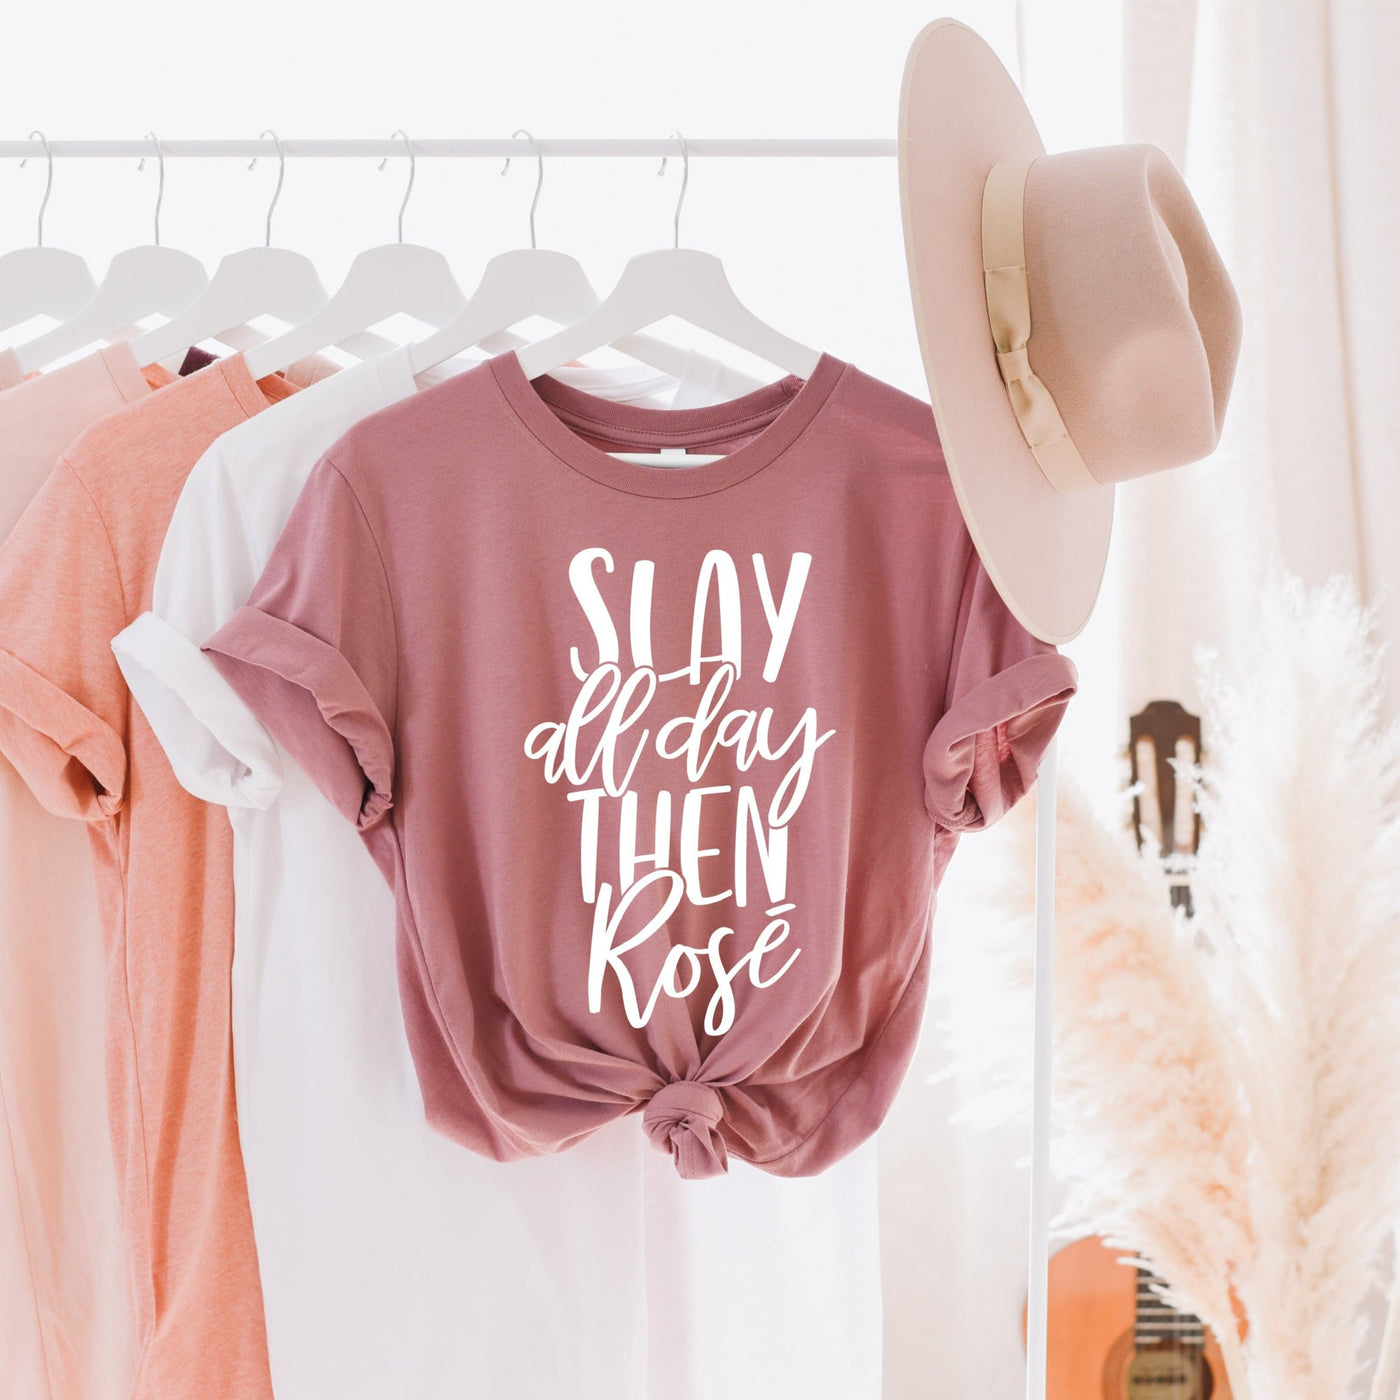 🌟 SALE 🌟 "Slay All Day, Then Rose" T-shirt